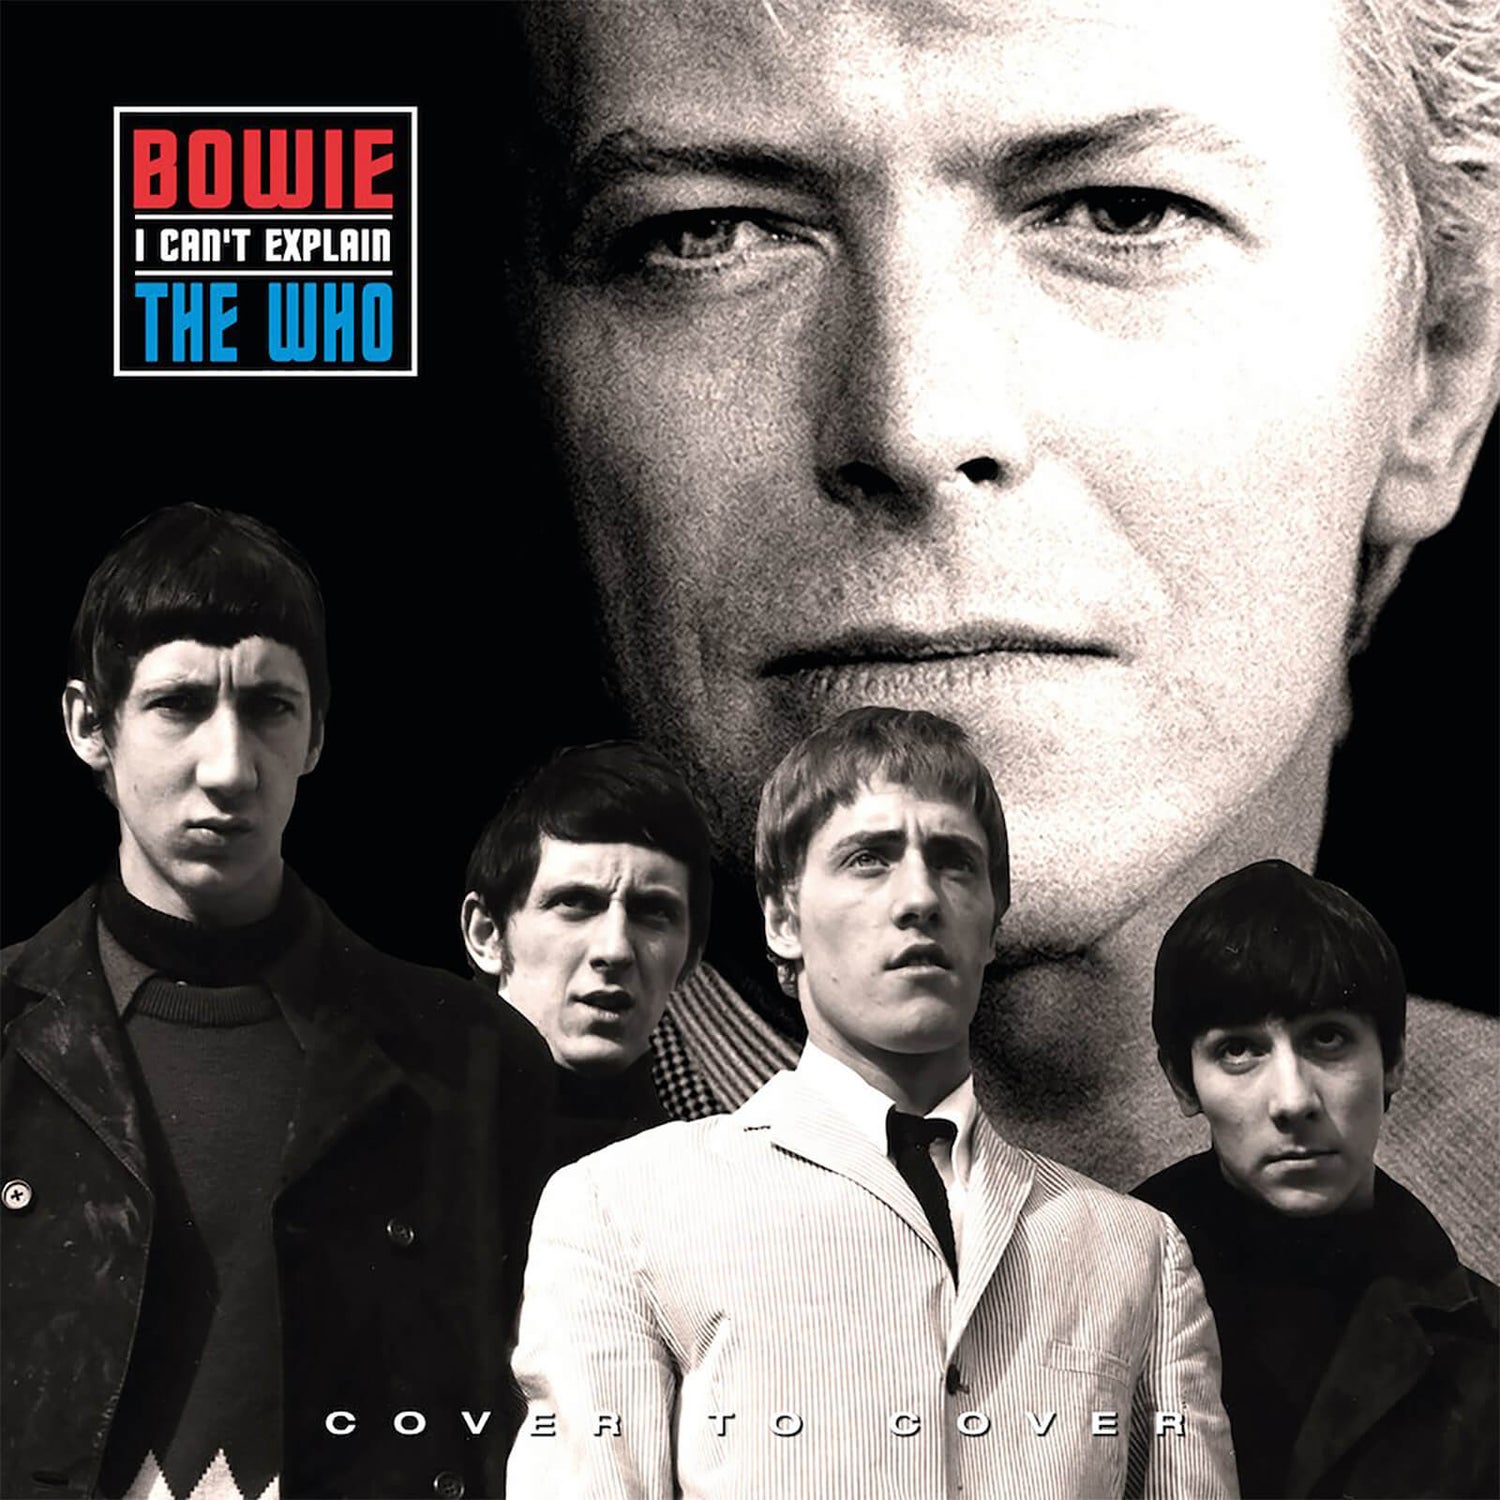 David Bowie / The Who - I Can't Explain (Rood Vinyl) 18 cm